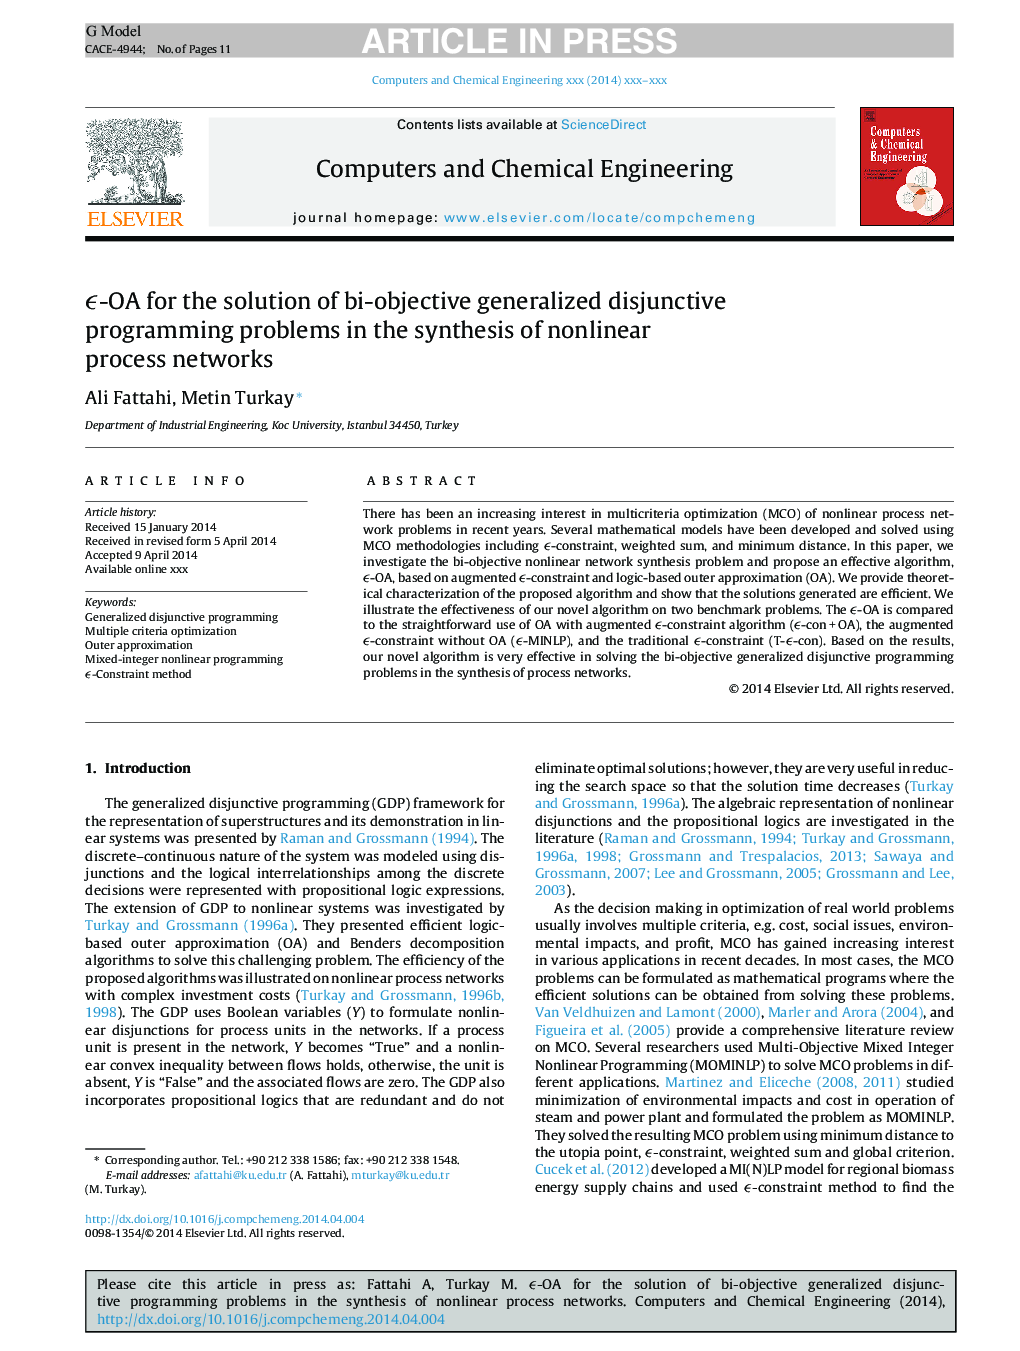 Ïµ-OA for the solution of bi-objective generalized disjunctive programming problems in the synthesis of nonlinear process networks